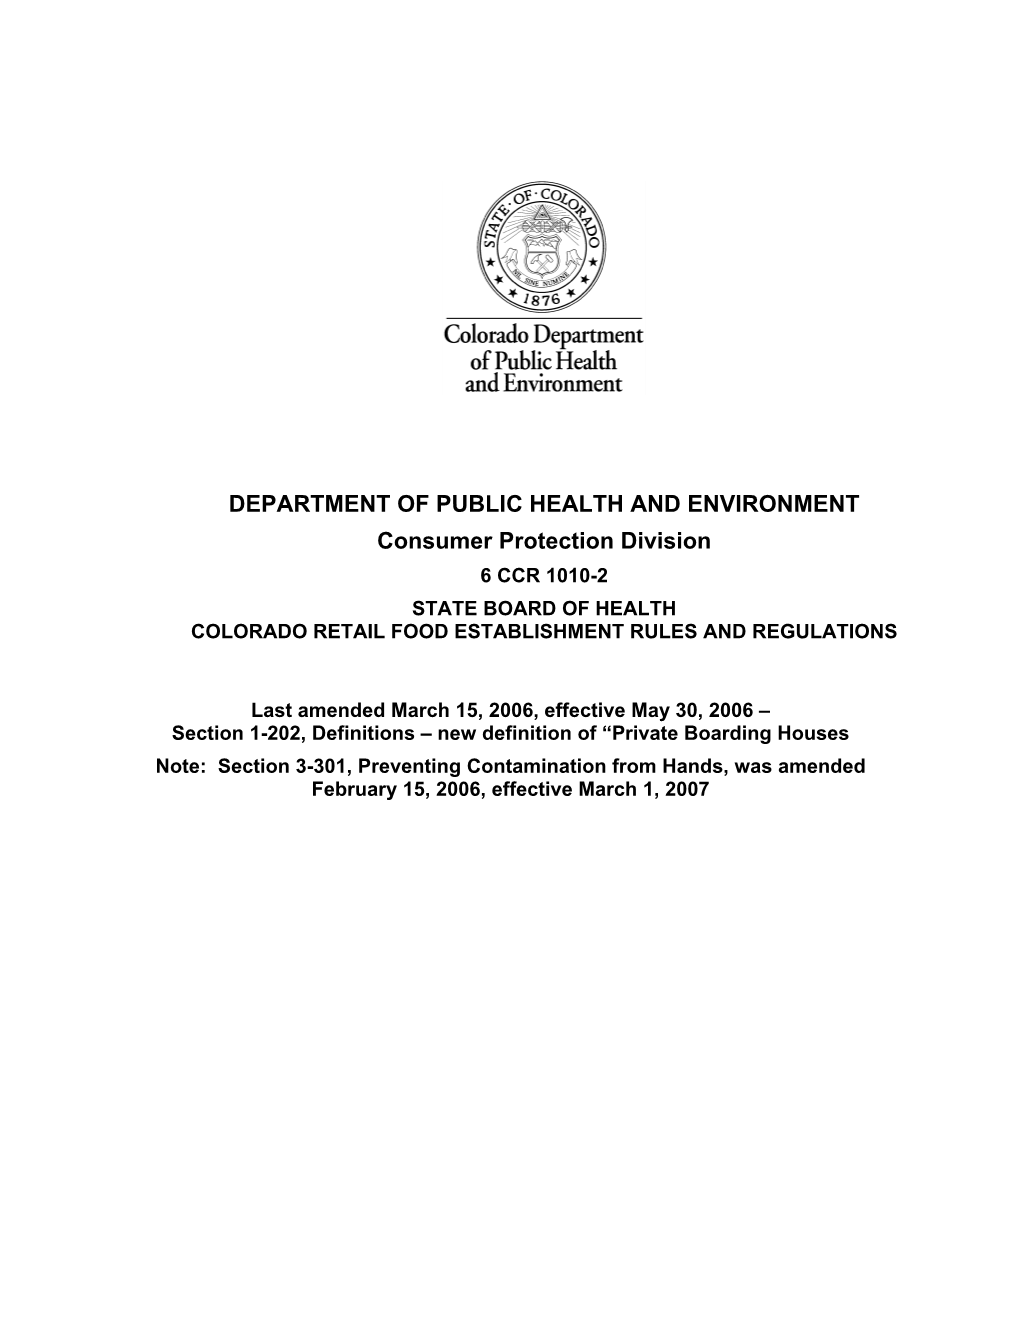 DEPARTMENT of PUBLIC HEALTH and ENVIRONMENT Consumer Protection Division 6 CCR 1010-2 STATE BOARD of HEALTH COLORADO RETAIL FOOD ESTABLISHMENT RULES and REGULATIONS